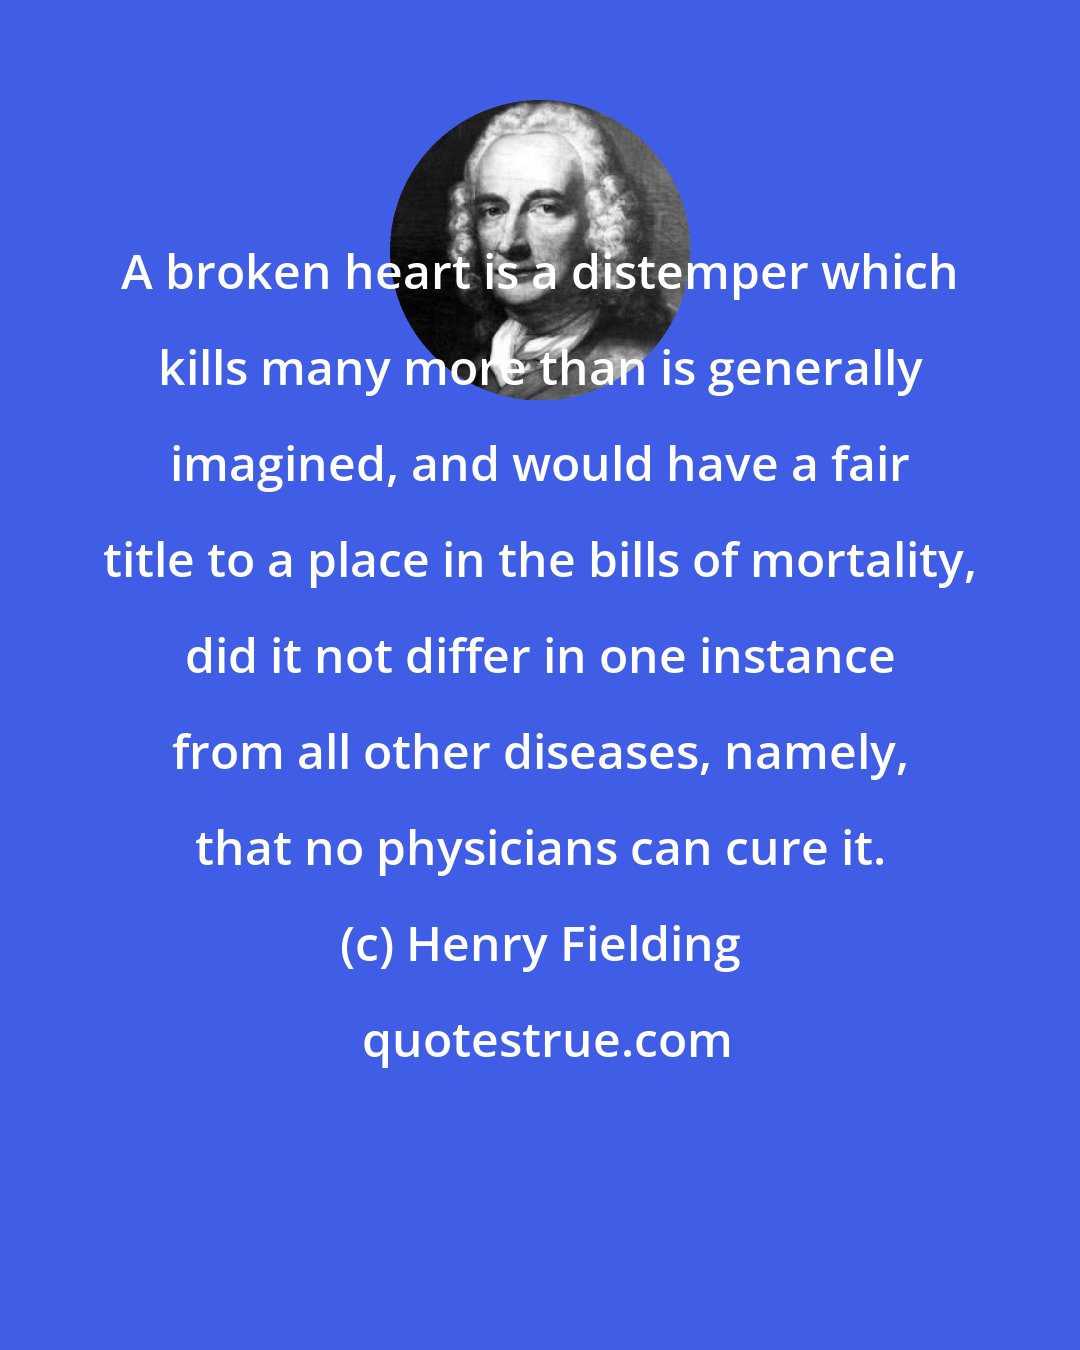 Henry Fielding: A broken heart is a distemper which kills many more than is generally imagined, and would have a fair title to a place in the bills of mortality, did it not differ in one instance from all other diseases, namely, that no physicians can cure it.